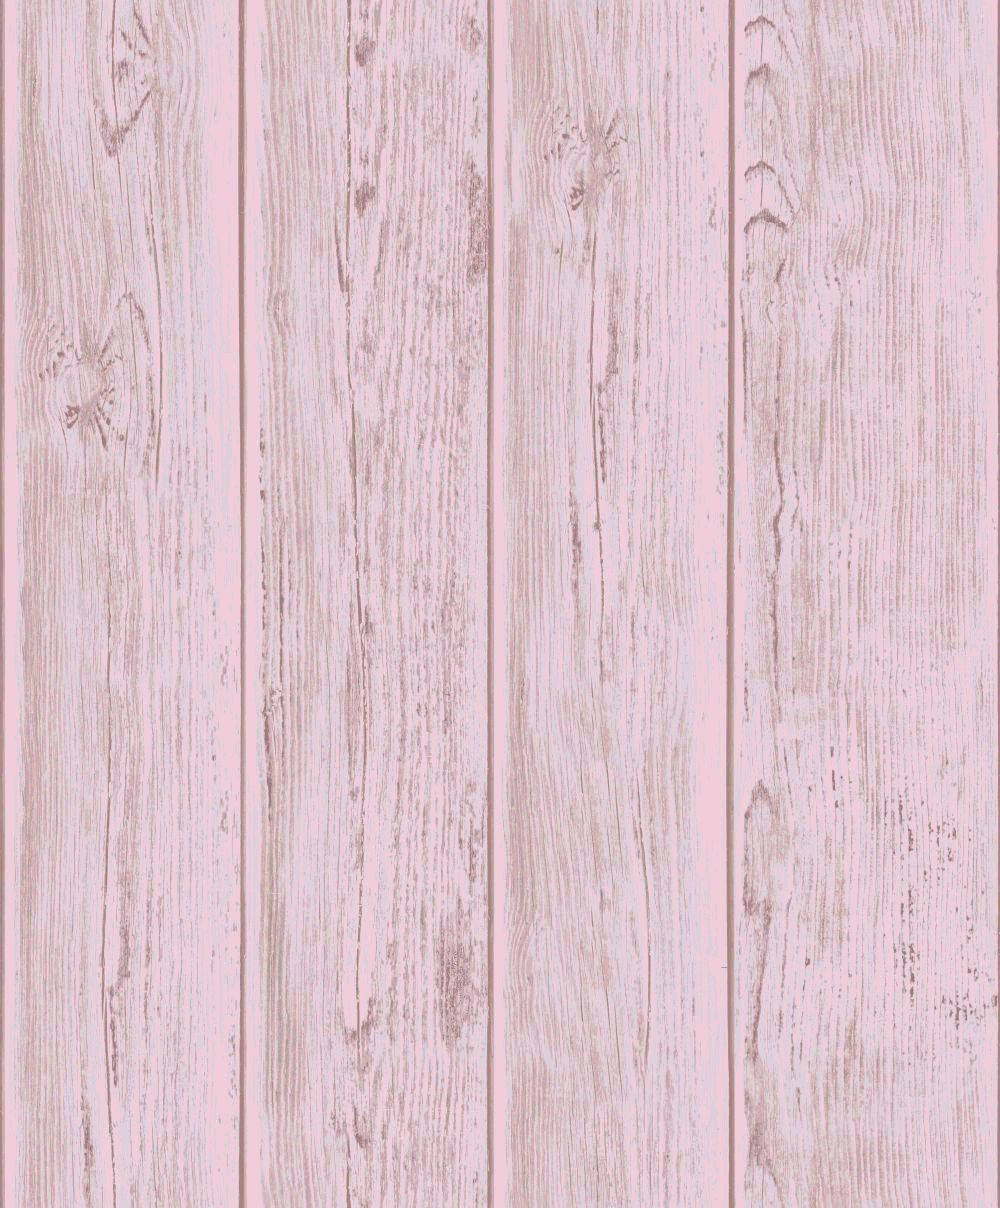 Bright and bold metallic Rose Gold wooden paneling Wallpaper